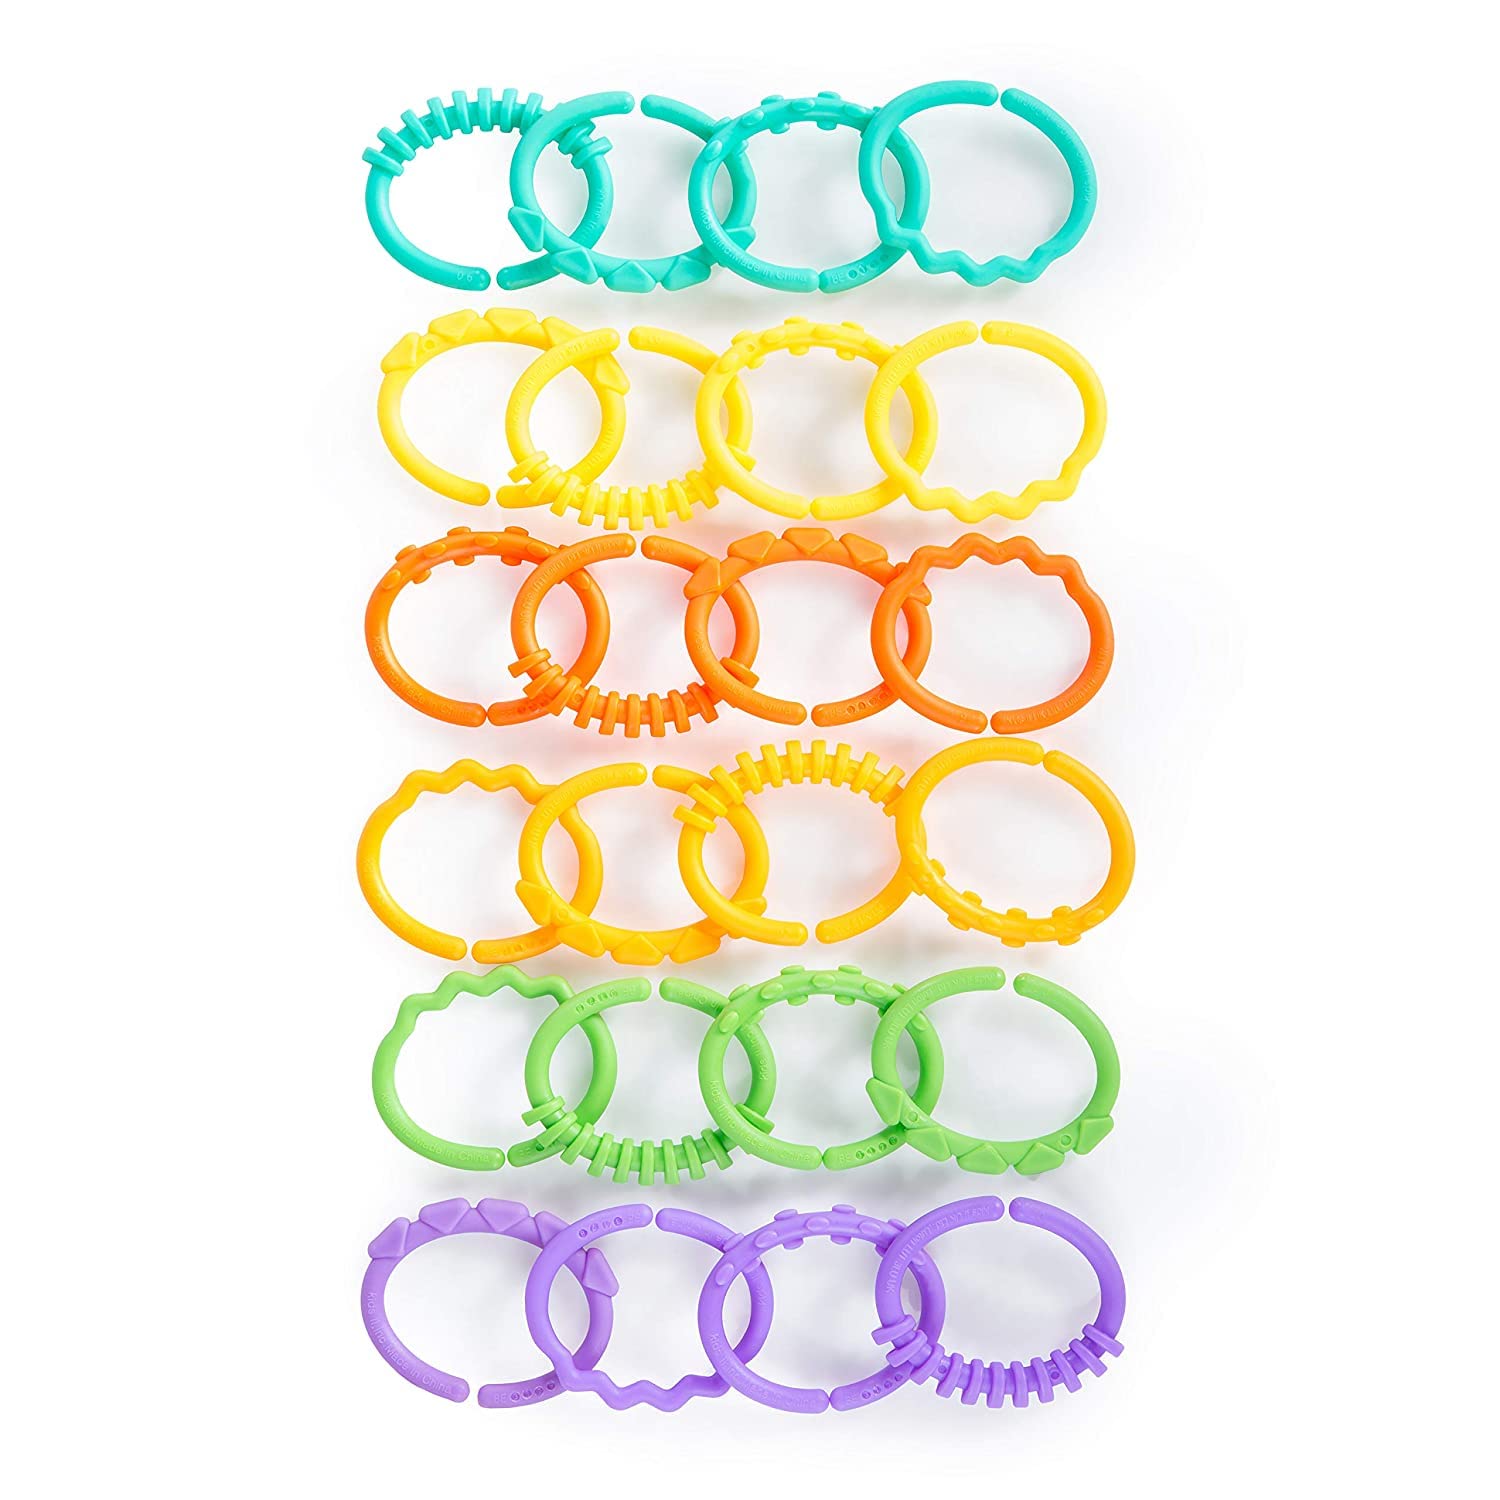 Bright Starts Lots of Links Rings - for Stroller or Carrier Seat - BPA-Free 24 Pcs, Ages 0 Months Plus
